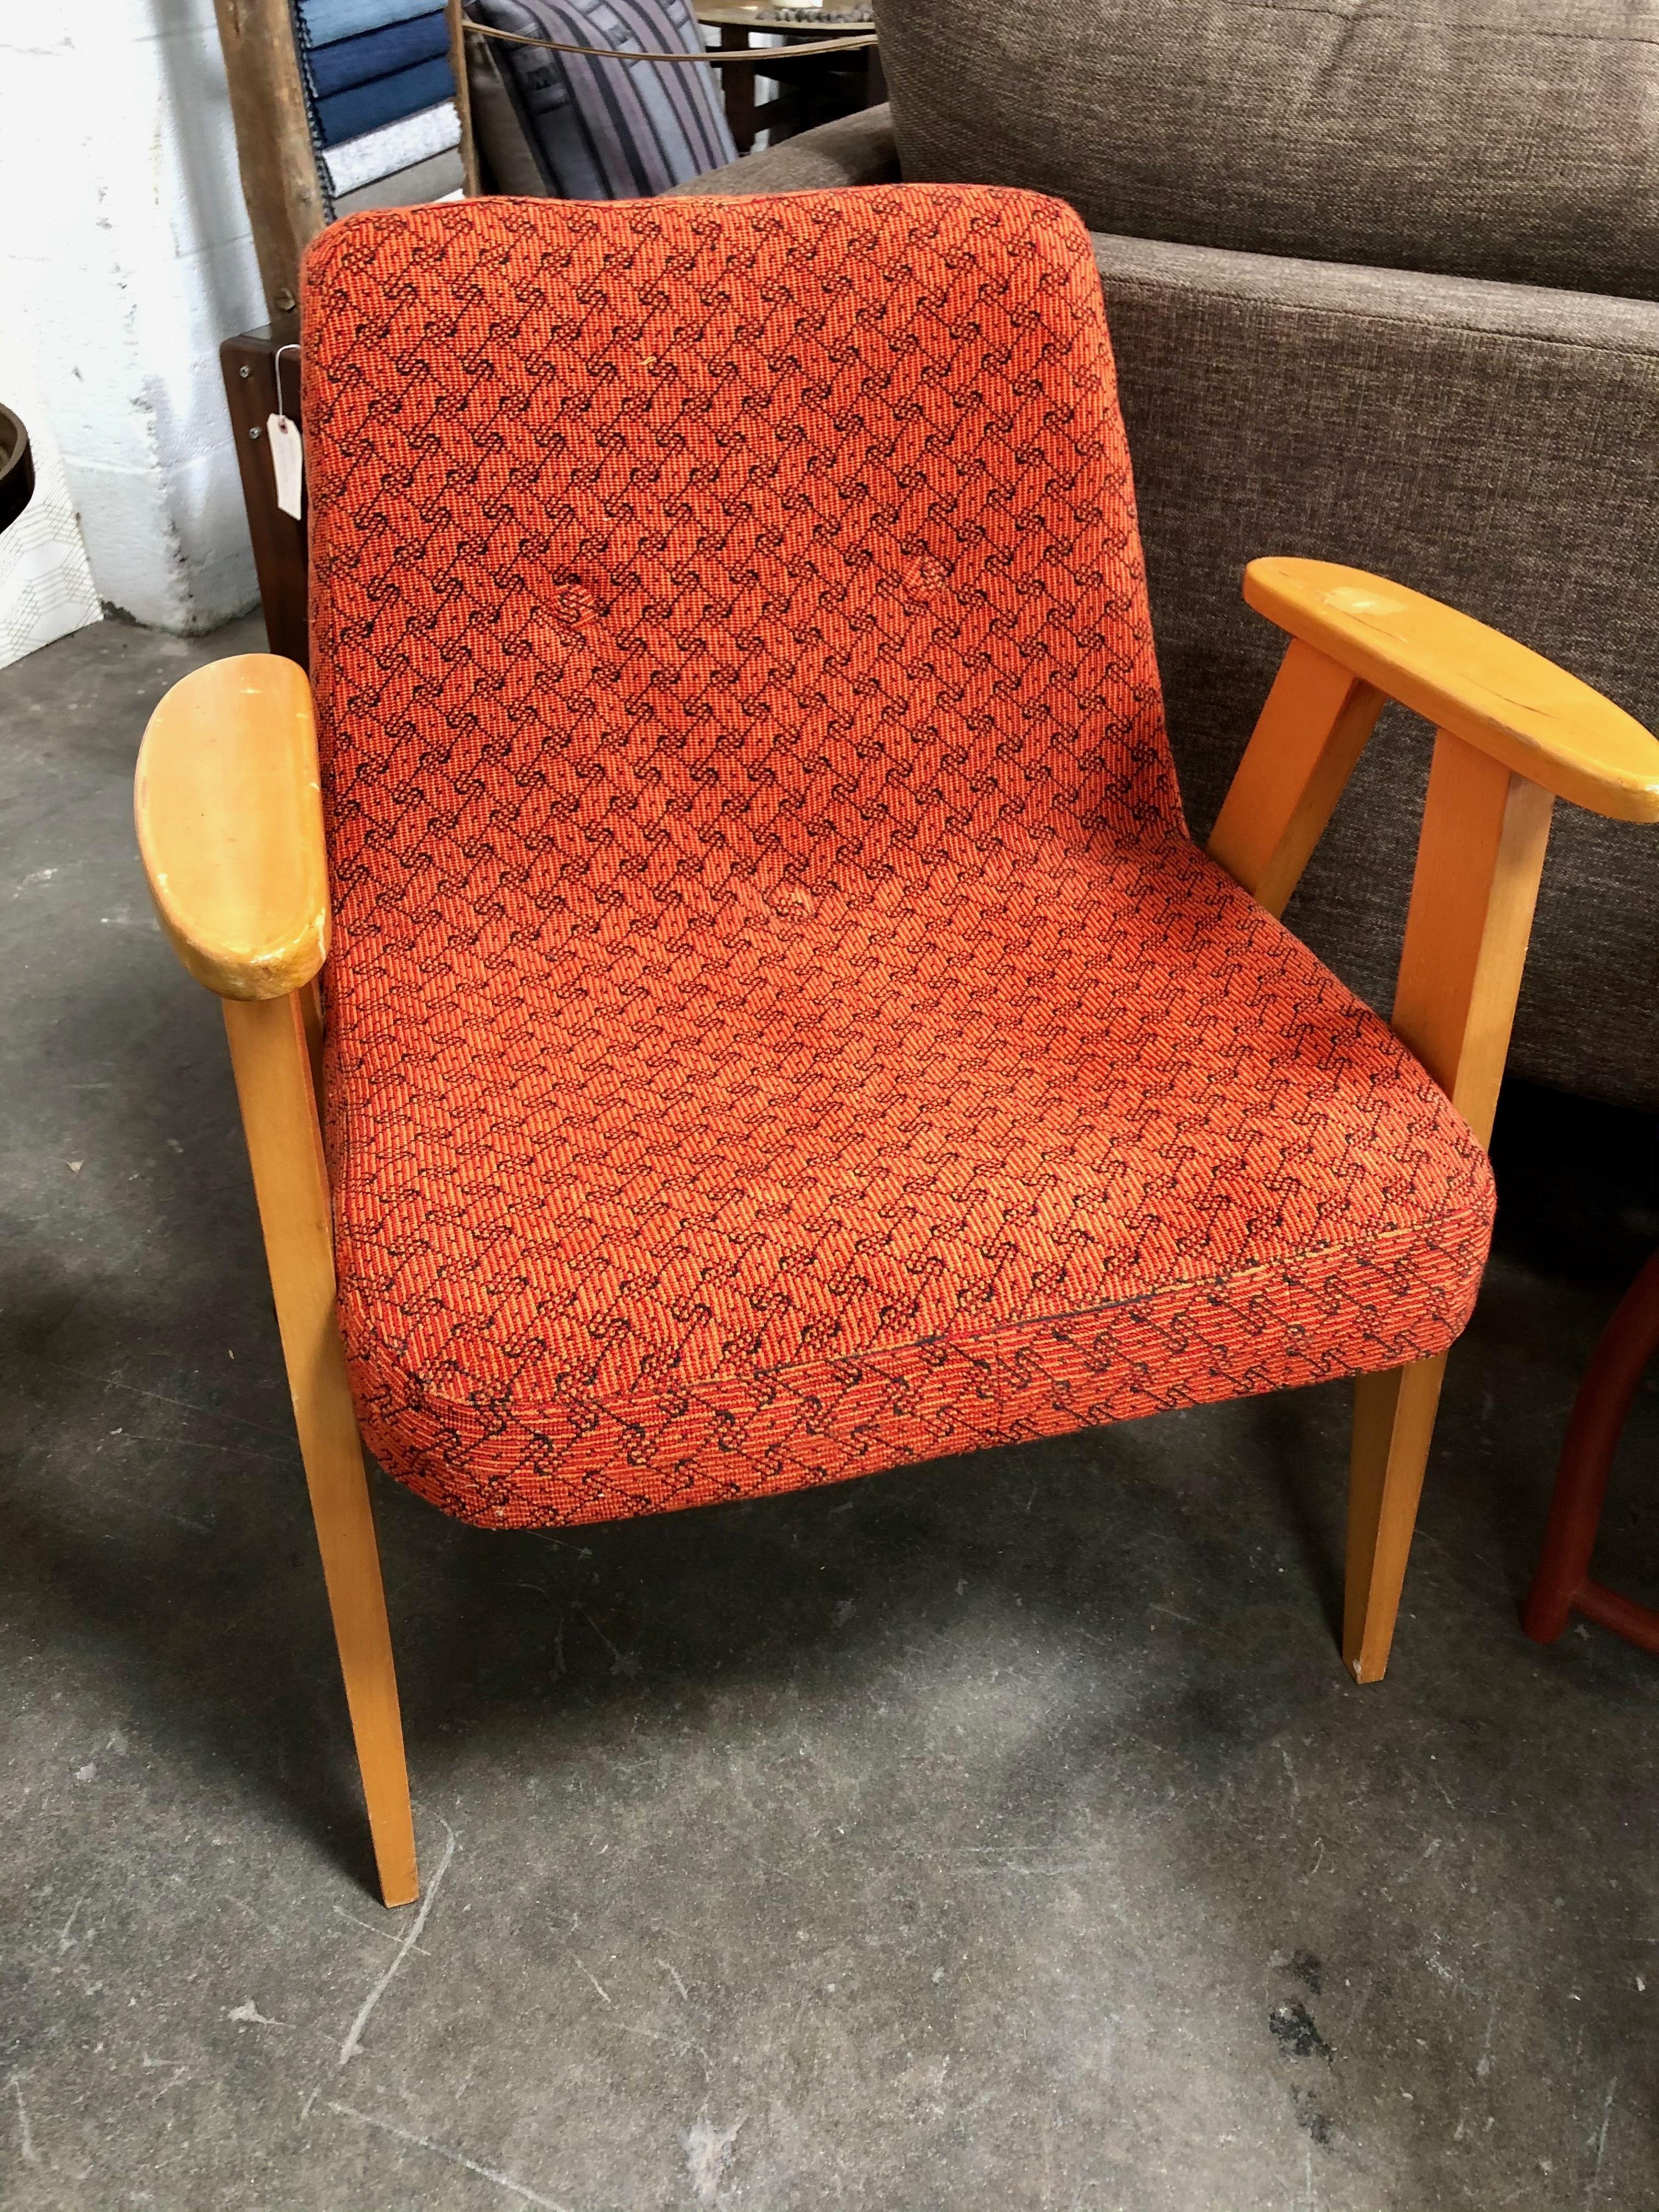 A pair of Mid Century armchairs in a bright orange red color.